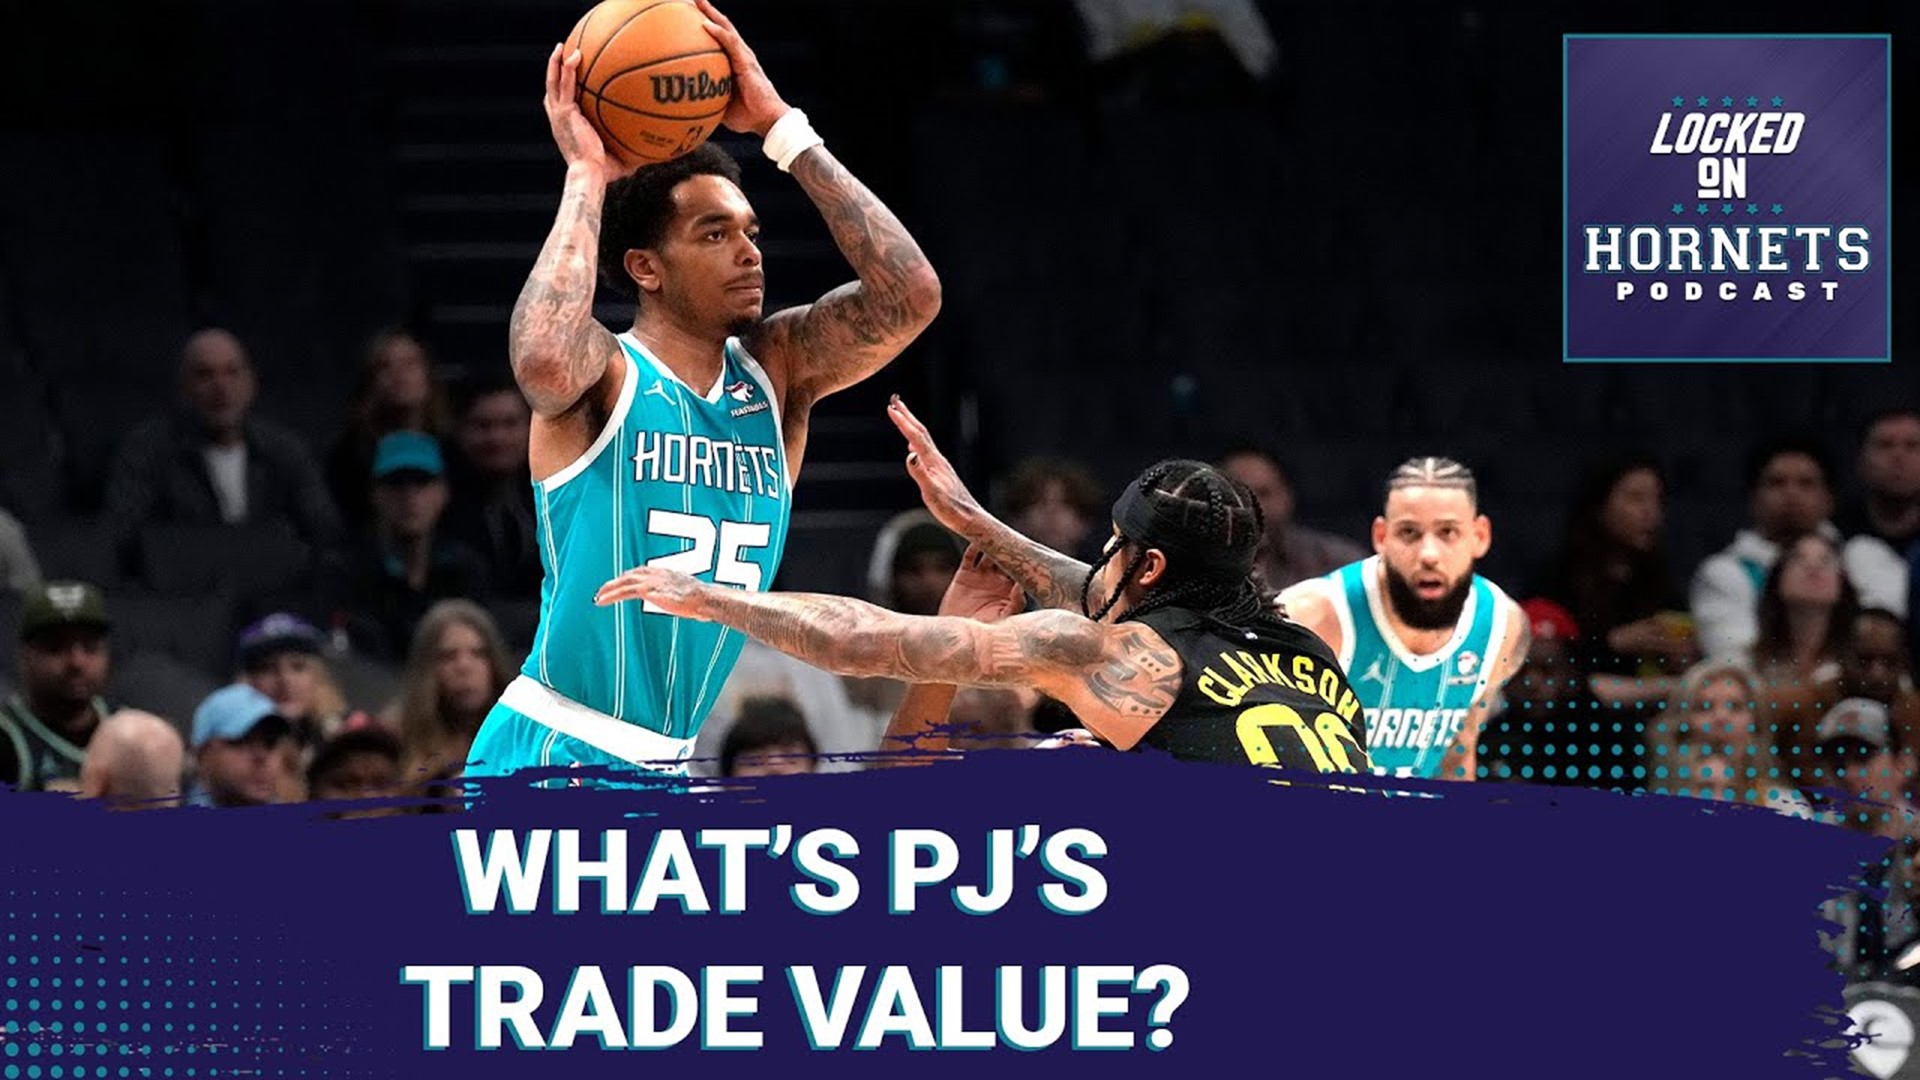 How much did PJ Washington's value rise over the weekend? Is Steve Clifford's job in jeopardy?